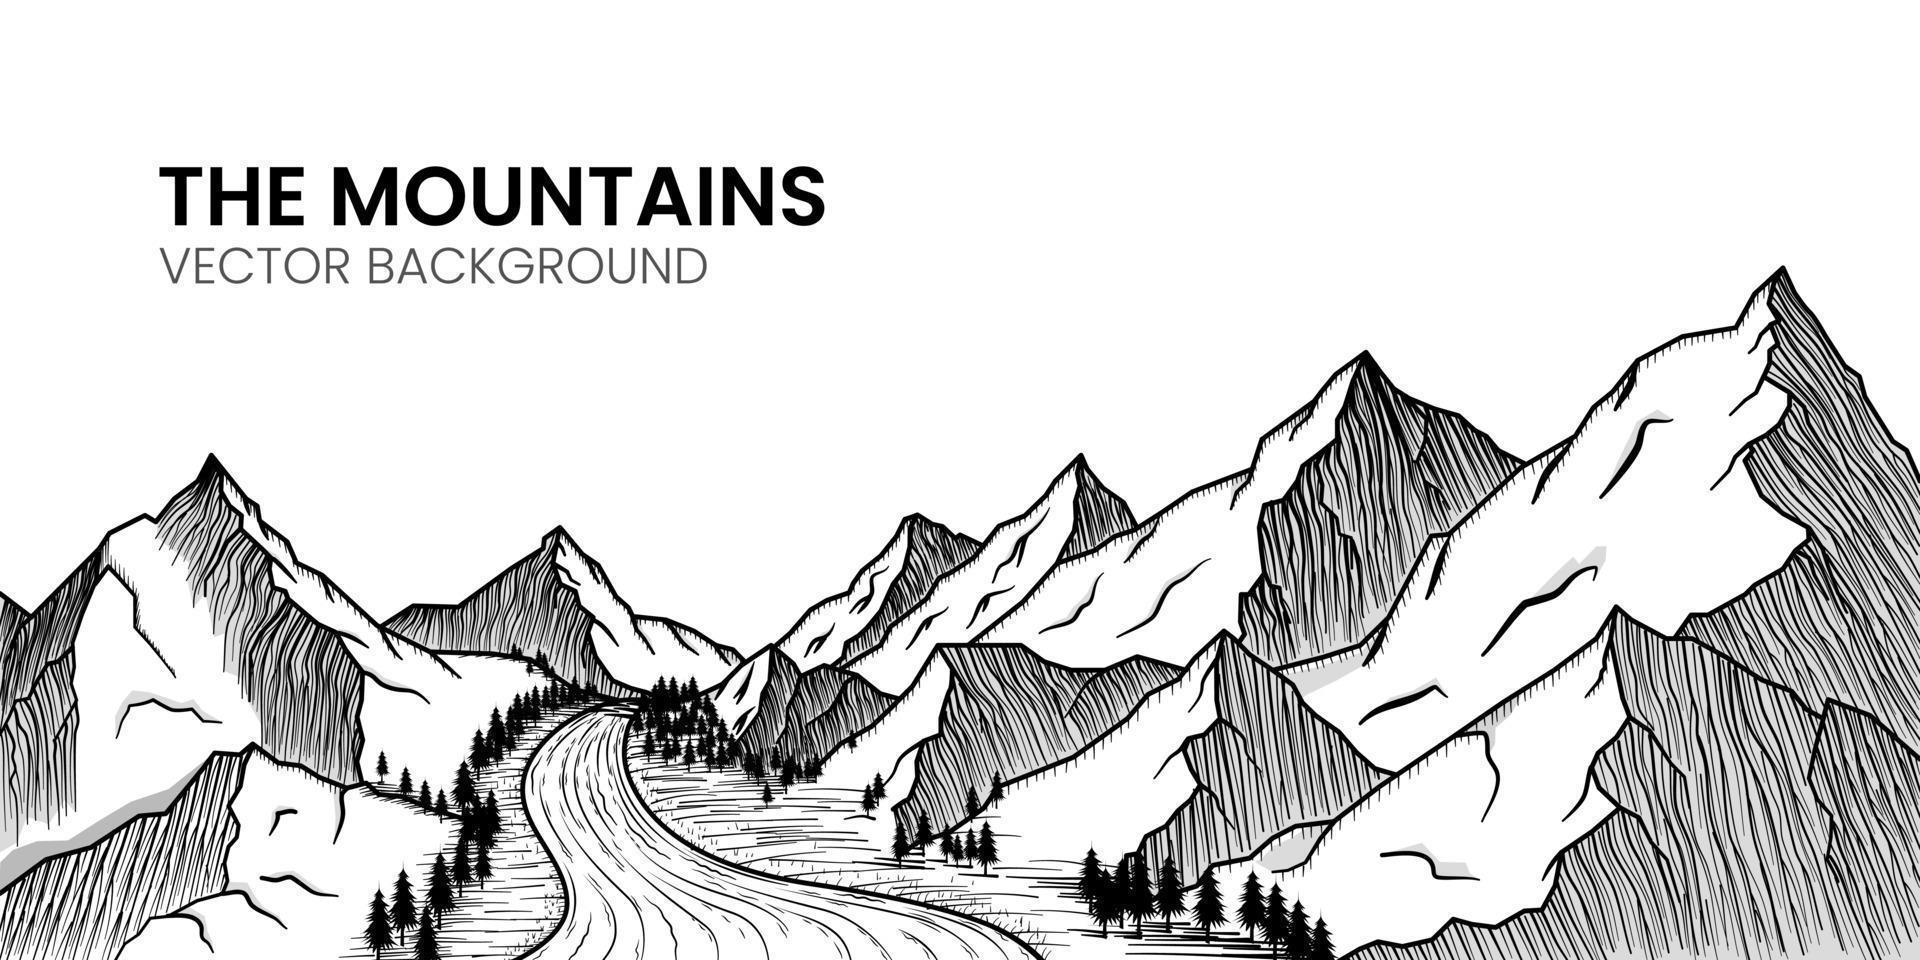 Mountains with pine trees and river landscape sketches on white background vector